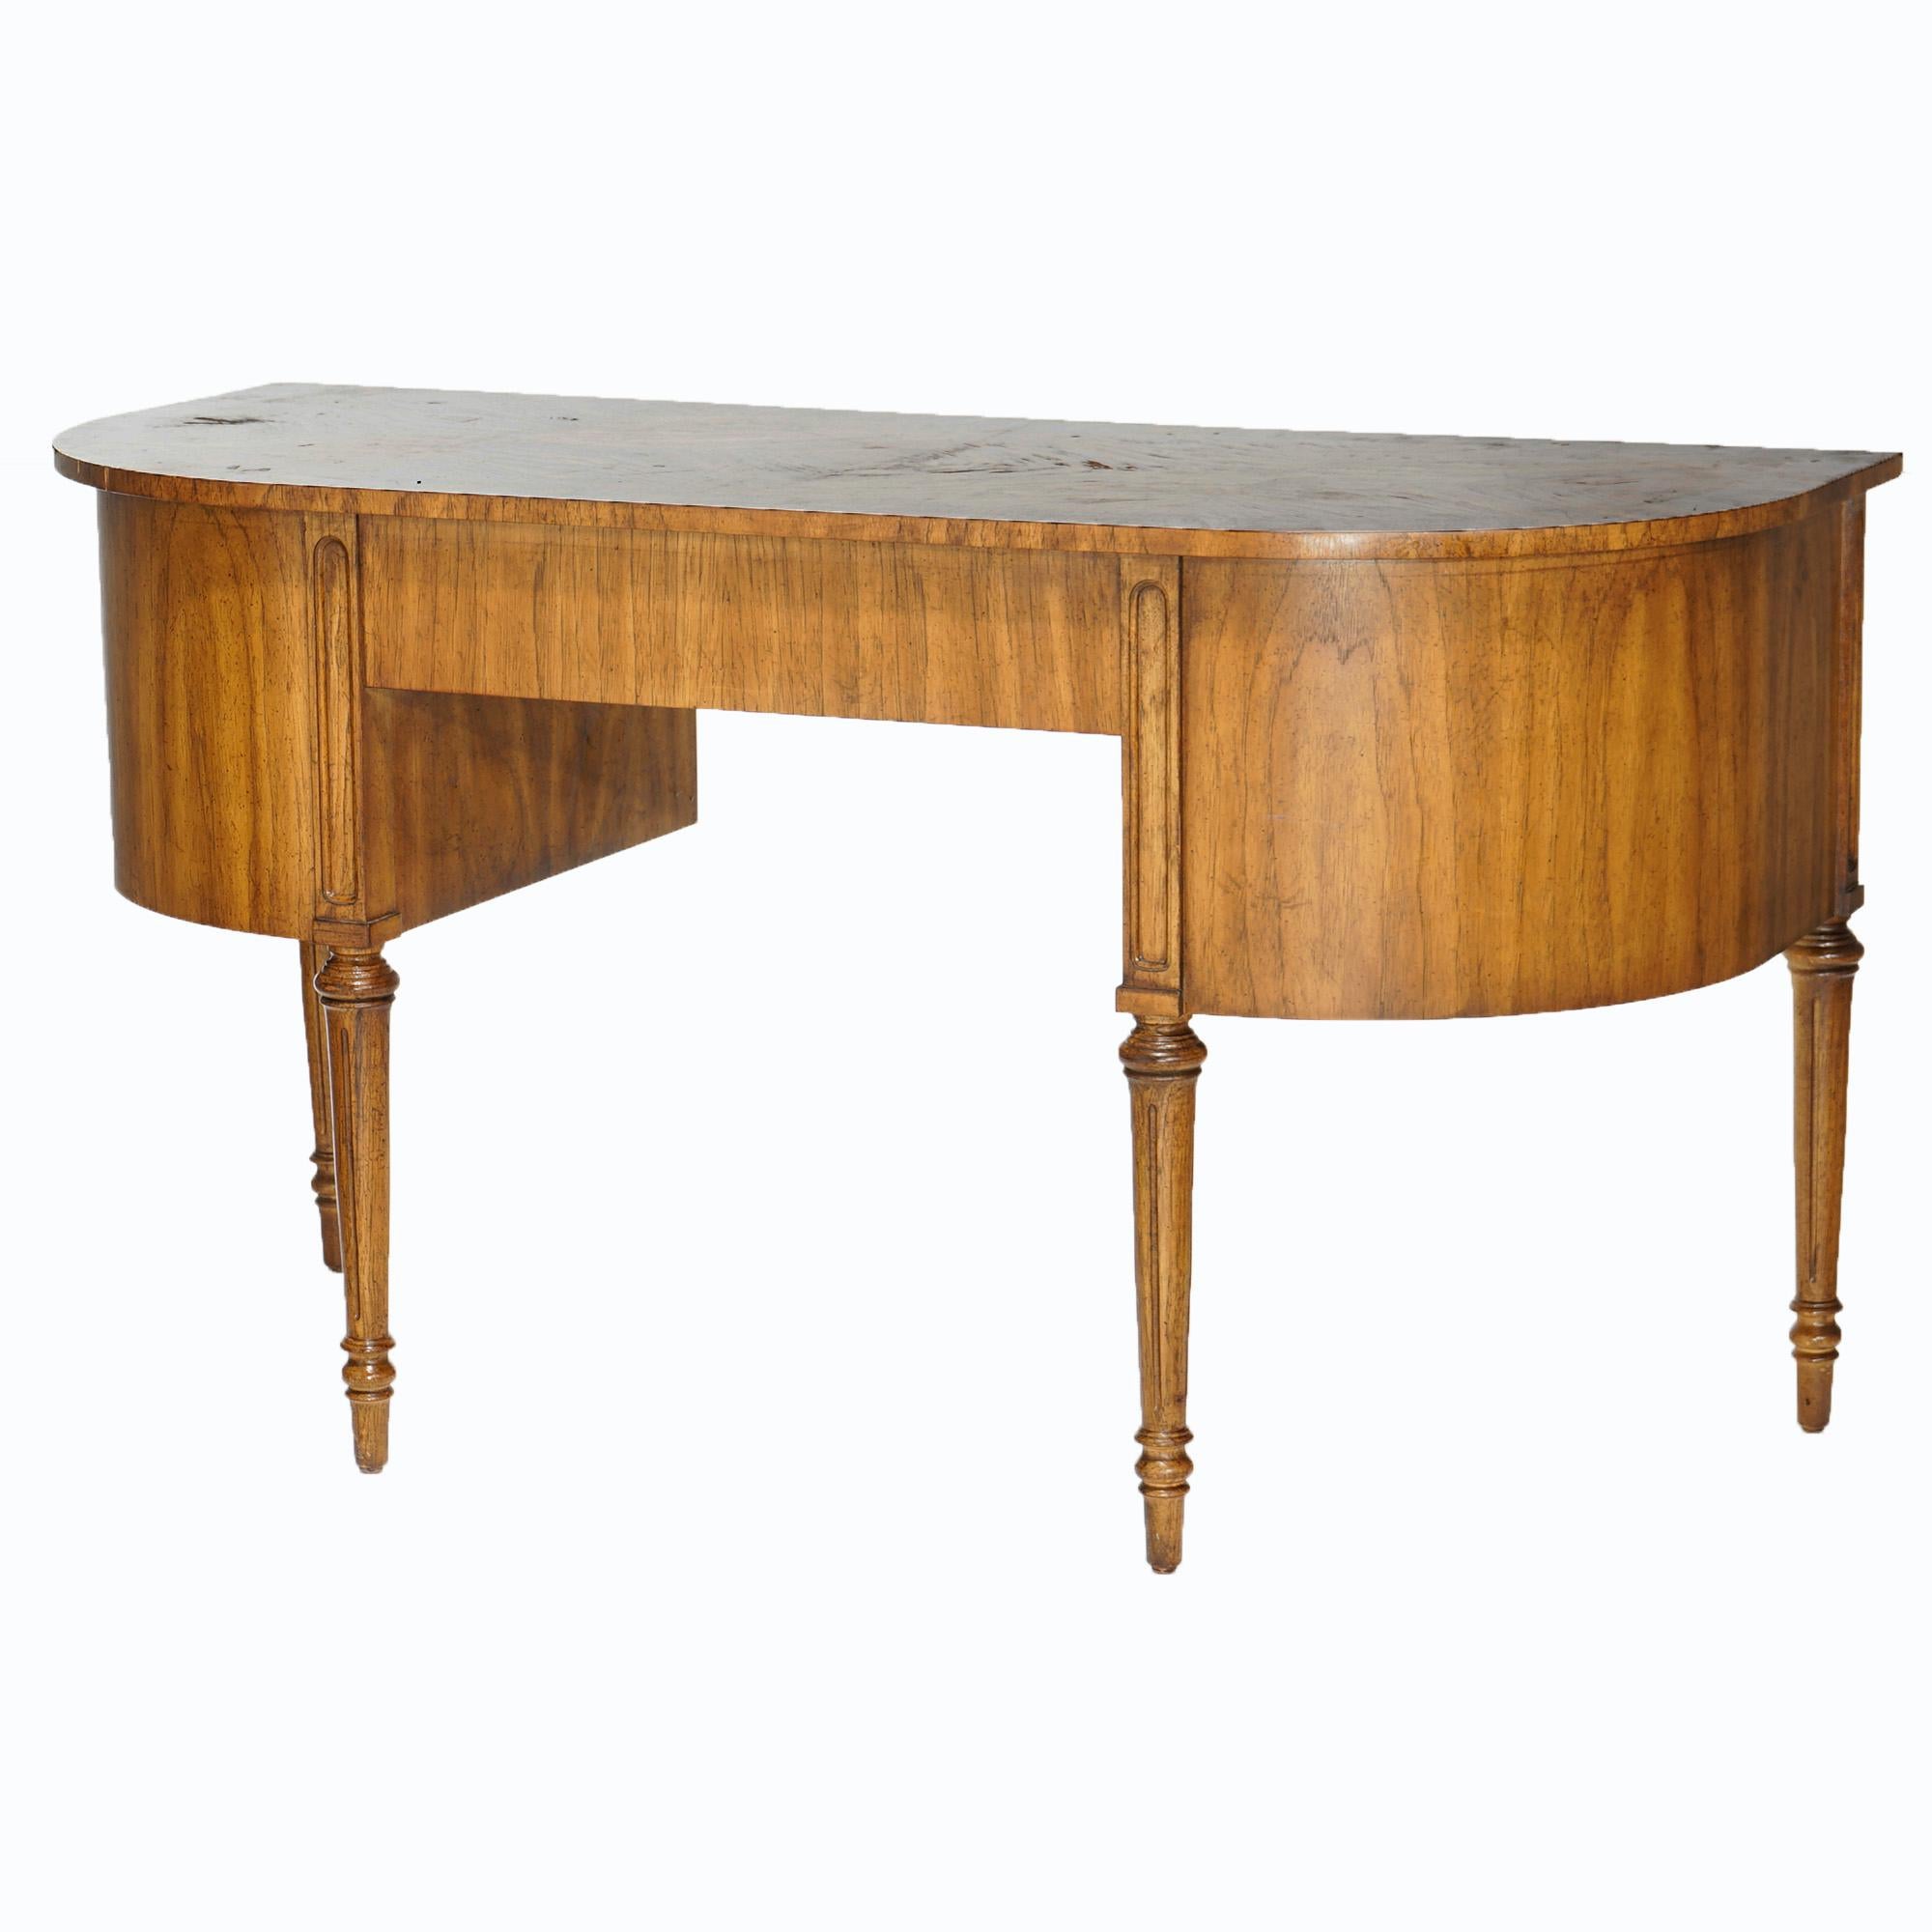 20th Century Antique French Louis XVI Style Rosewood & Kingwood Demilune Writing Desk, c1920